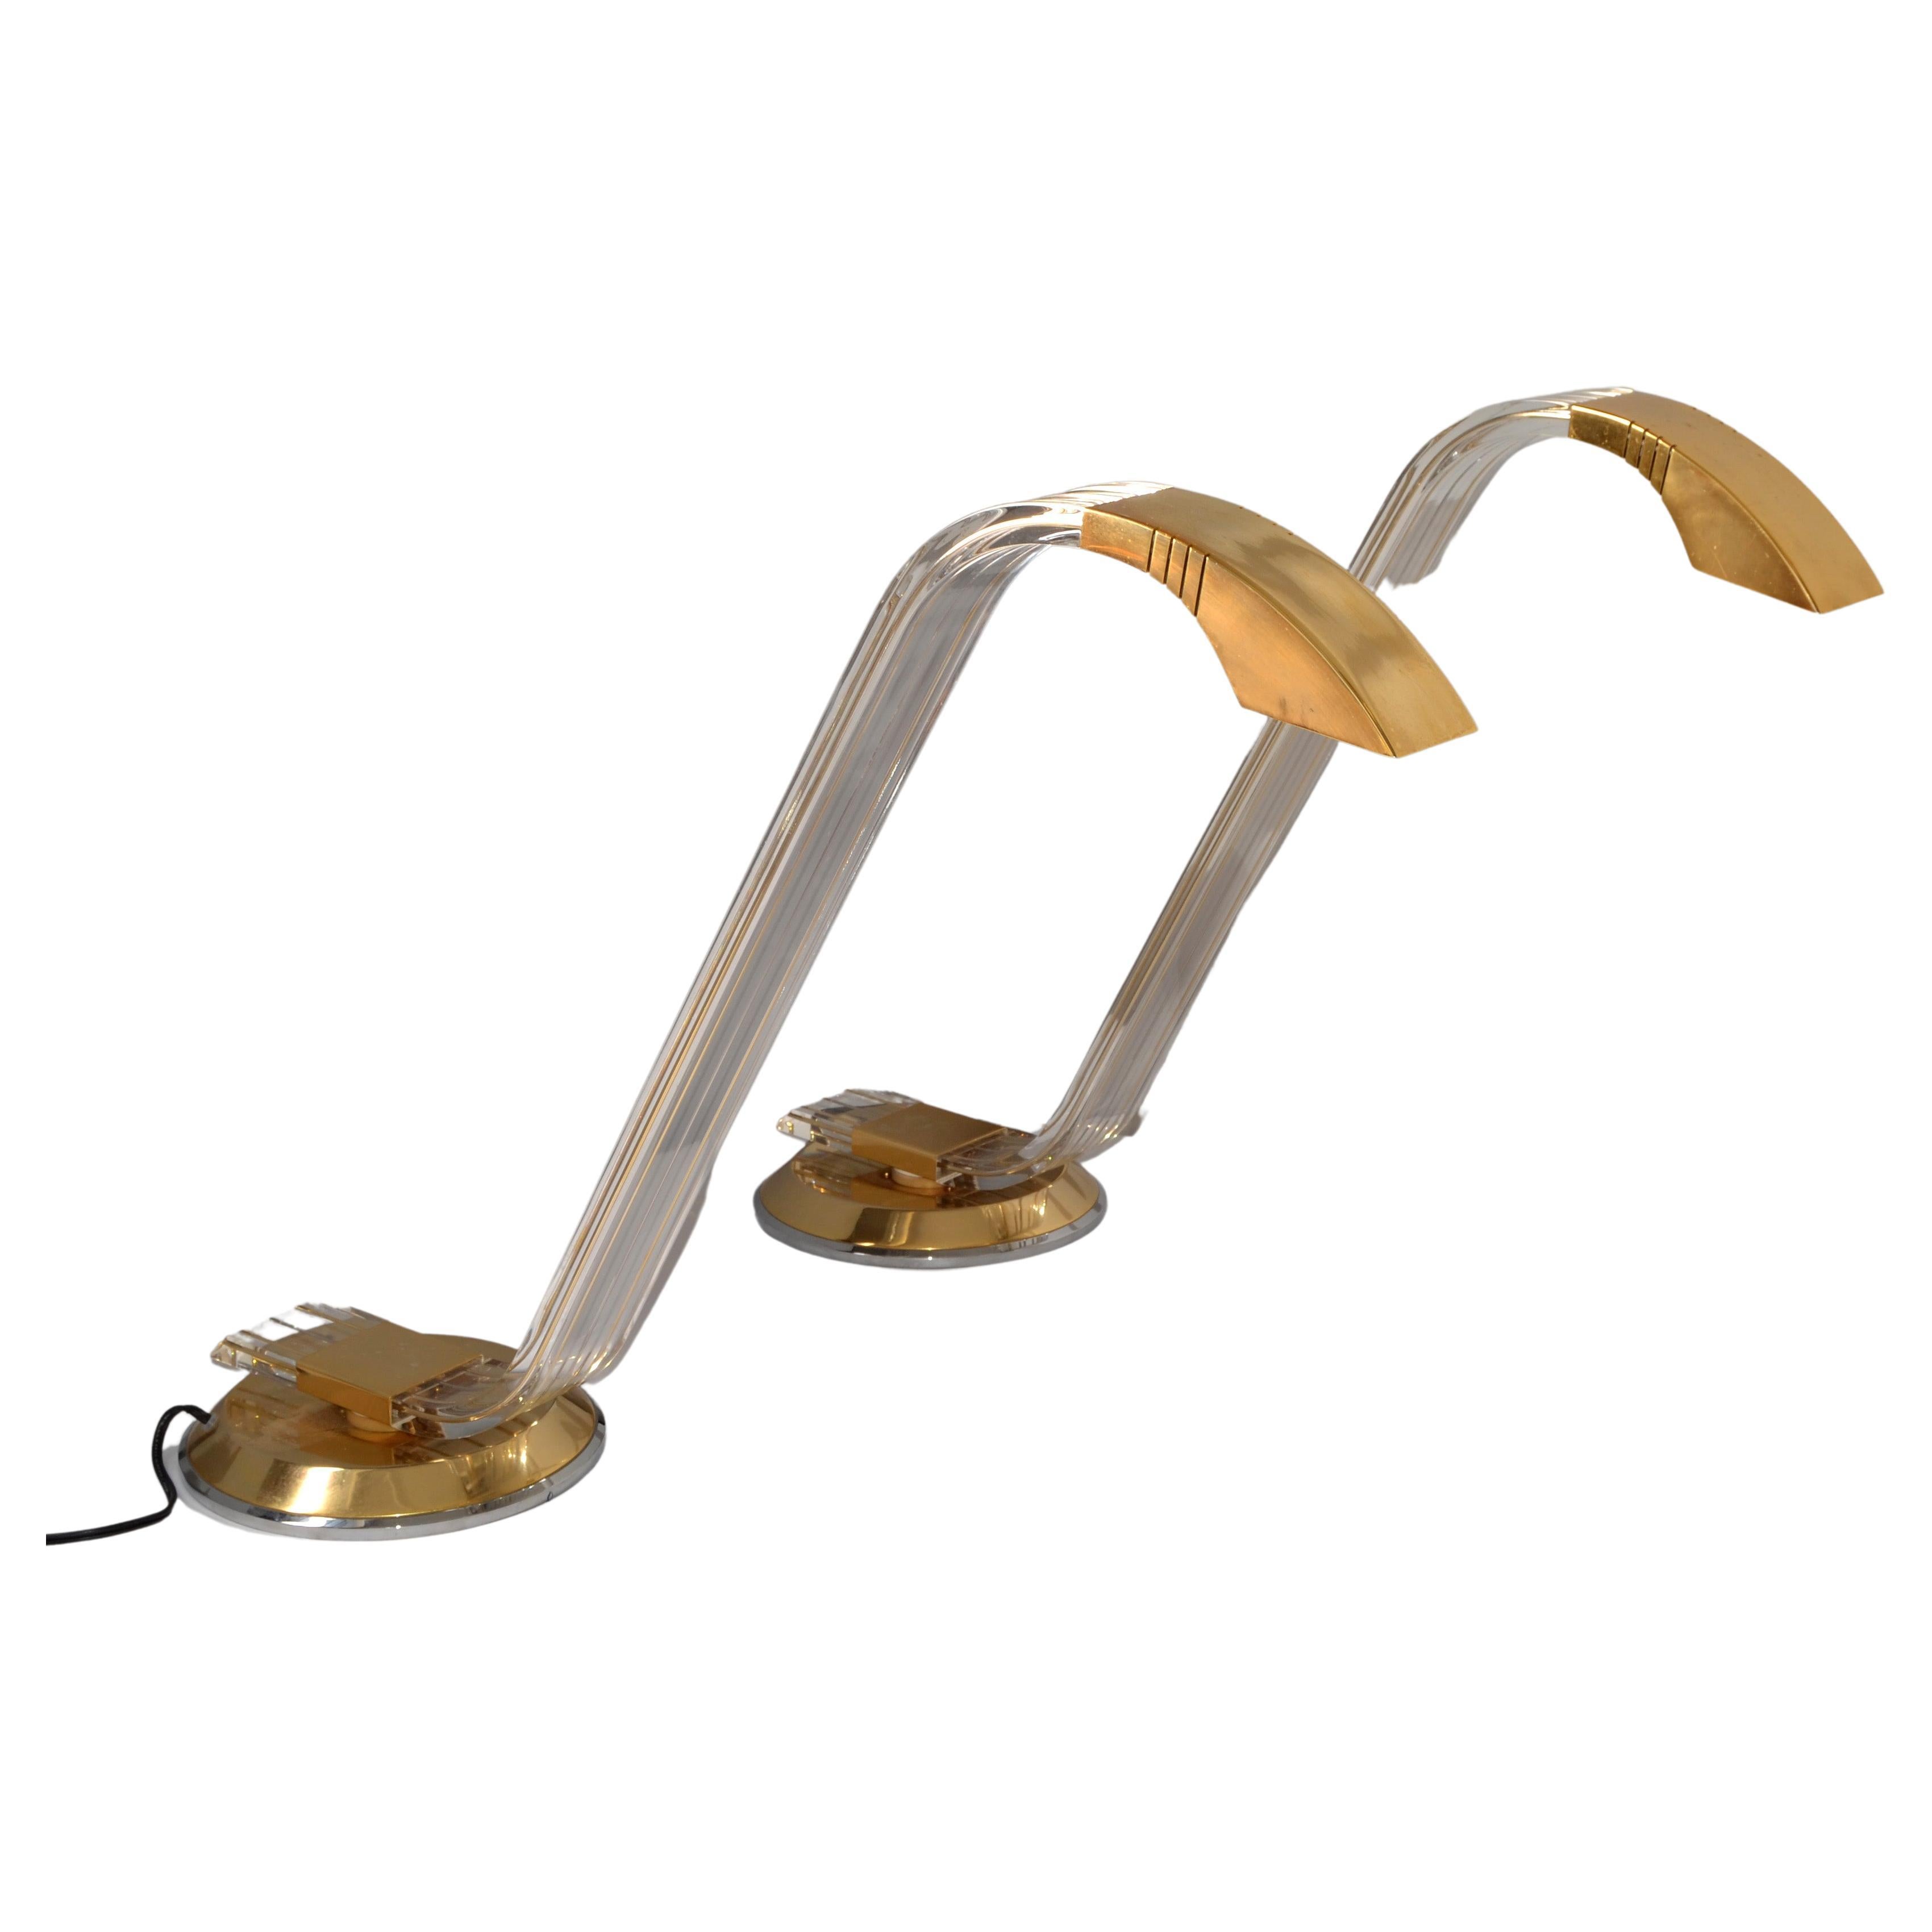 Pair of Italian Arredoluce attributed Mid-Century Modern Swing Brass Lucite Table or Desk Lamps made in the 1970s.
Features a Gooseneck Style Lucite Stem filled with Brass Lines and swings 1/2-way around. The Round Base is Brass plated and the